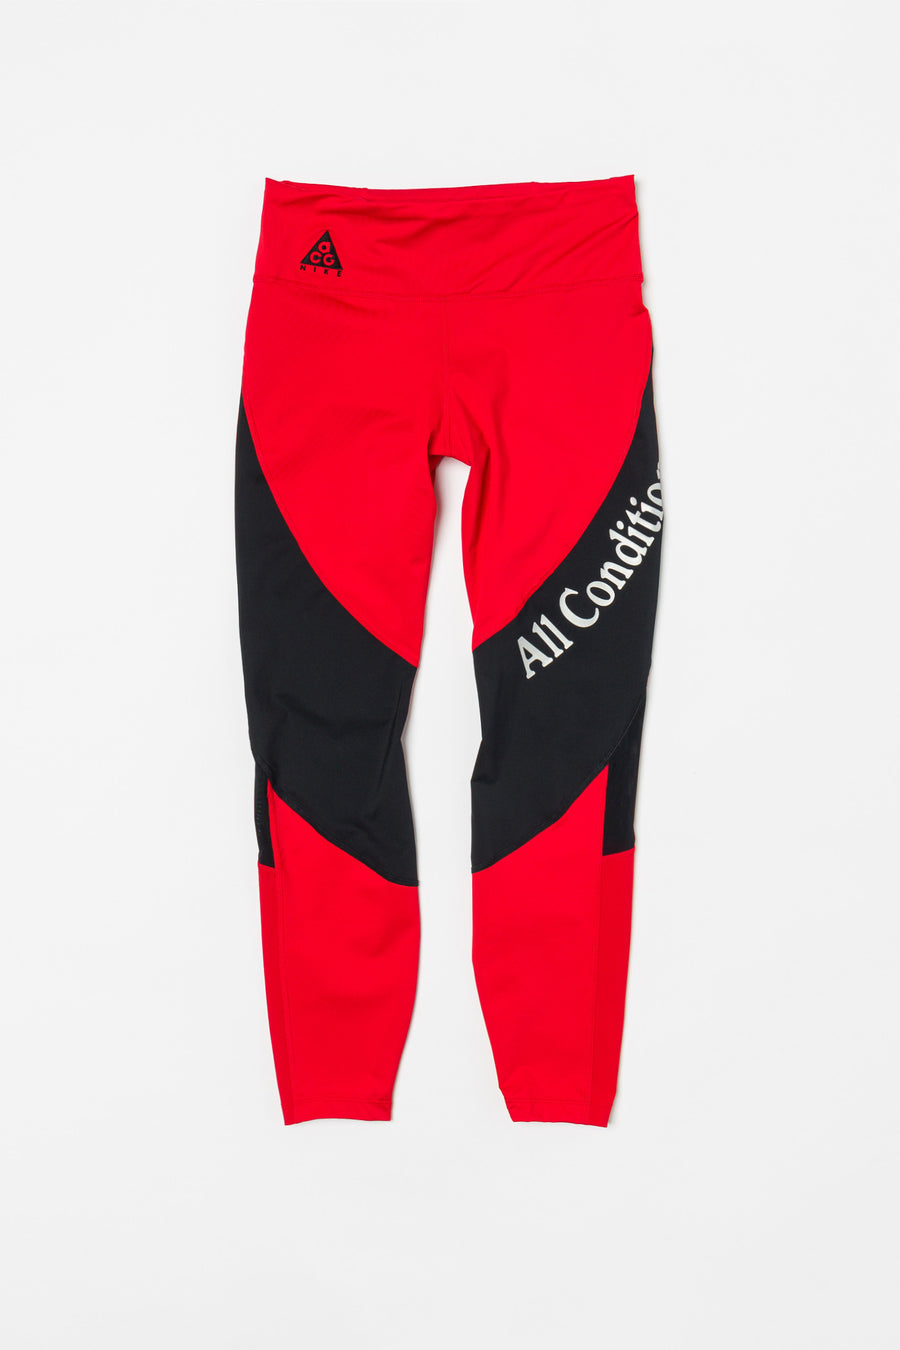 ACG Tights in Red/White